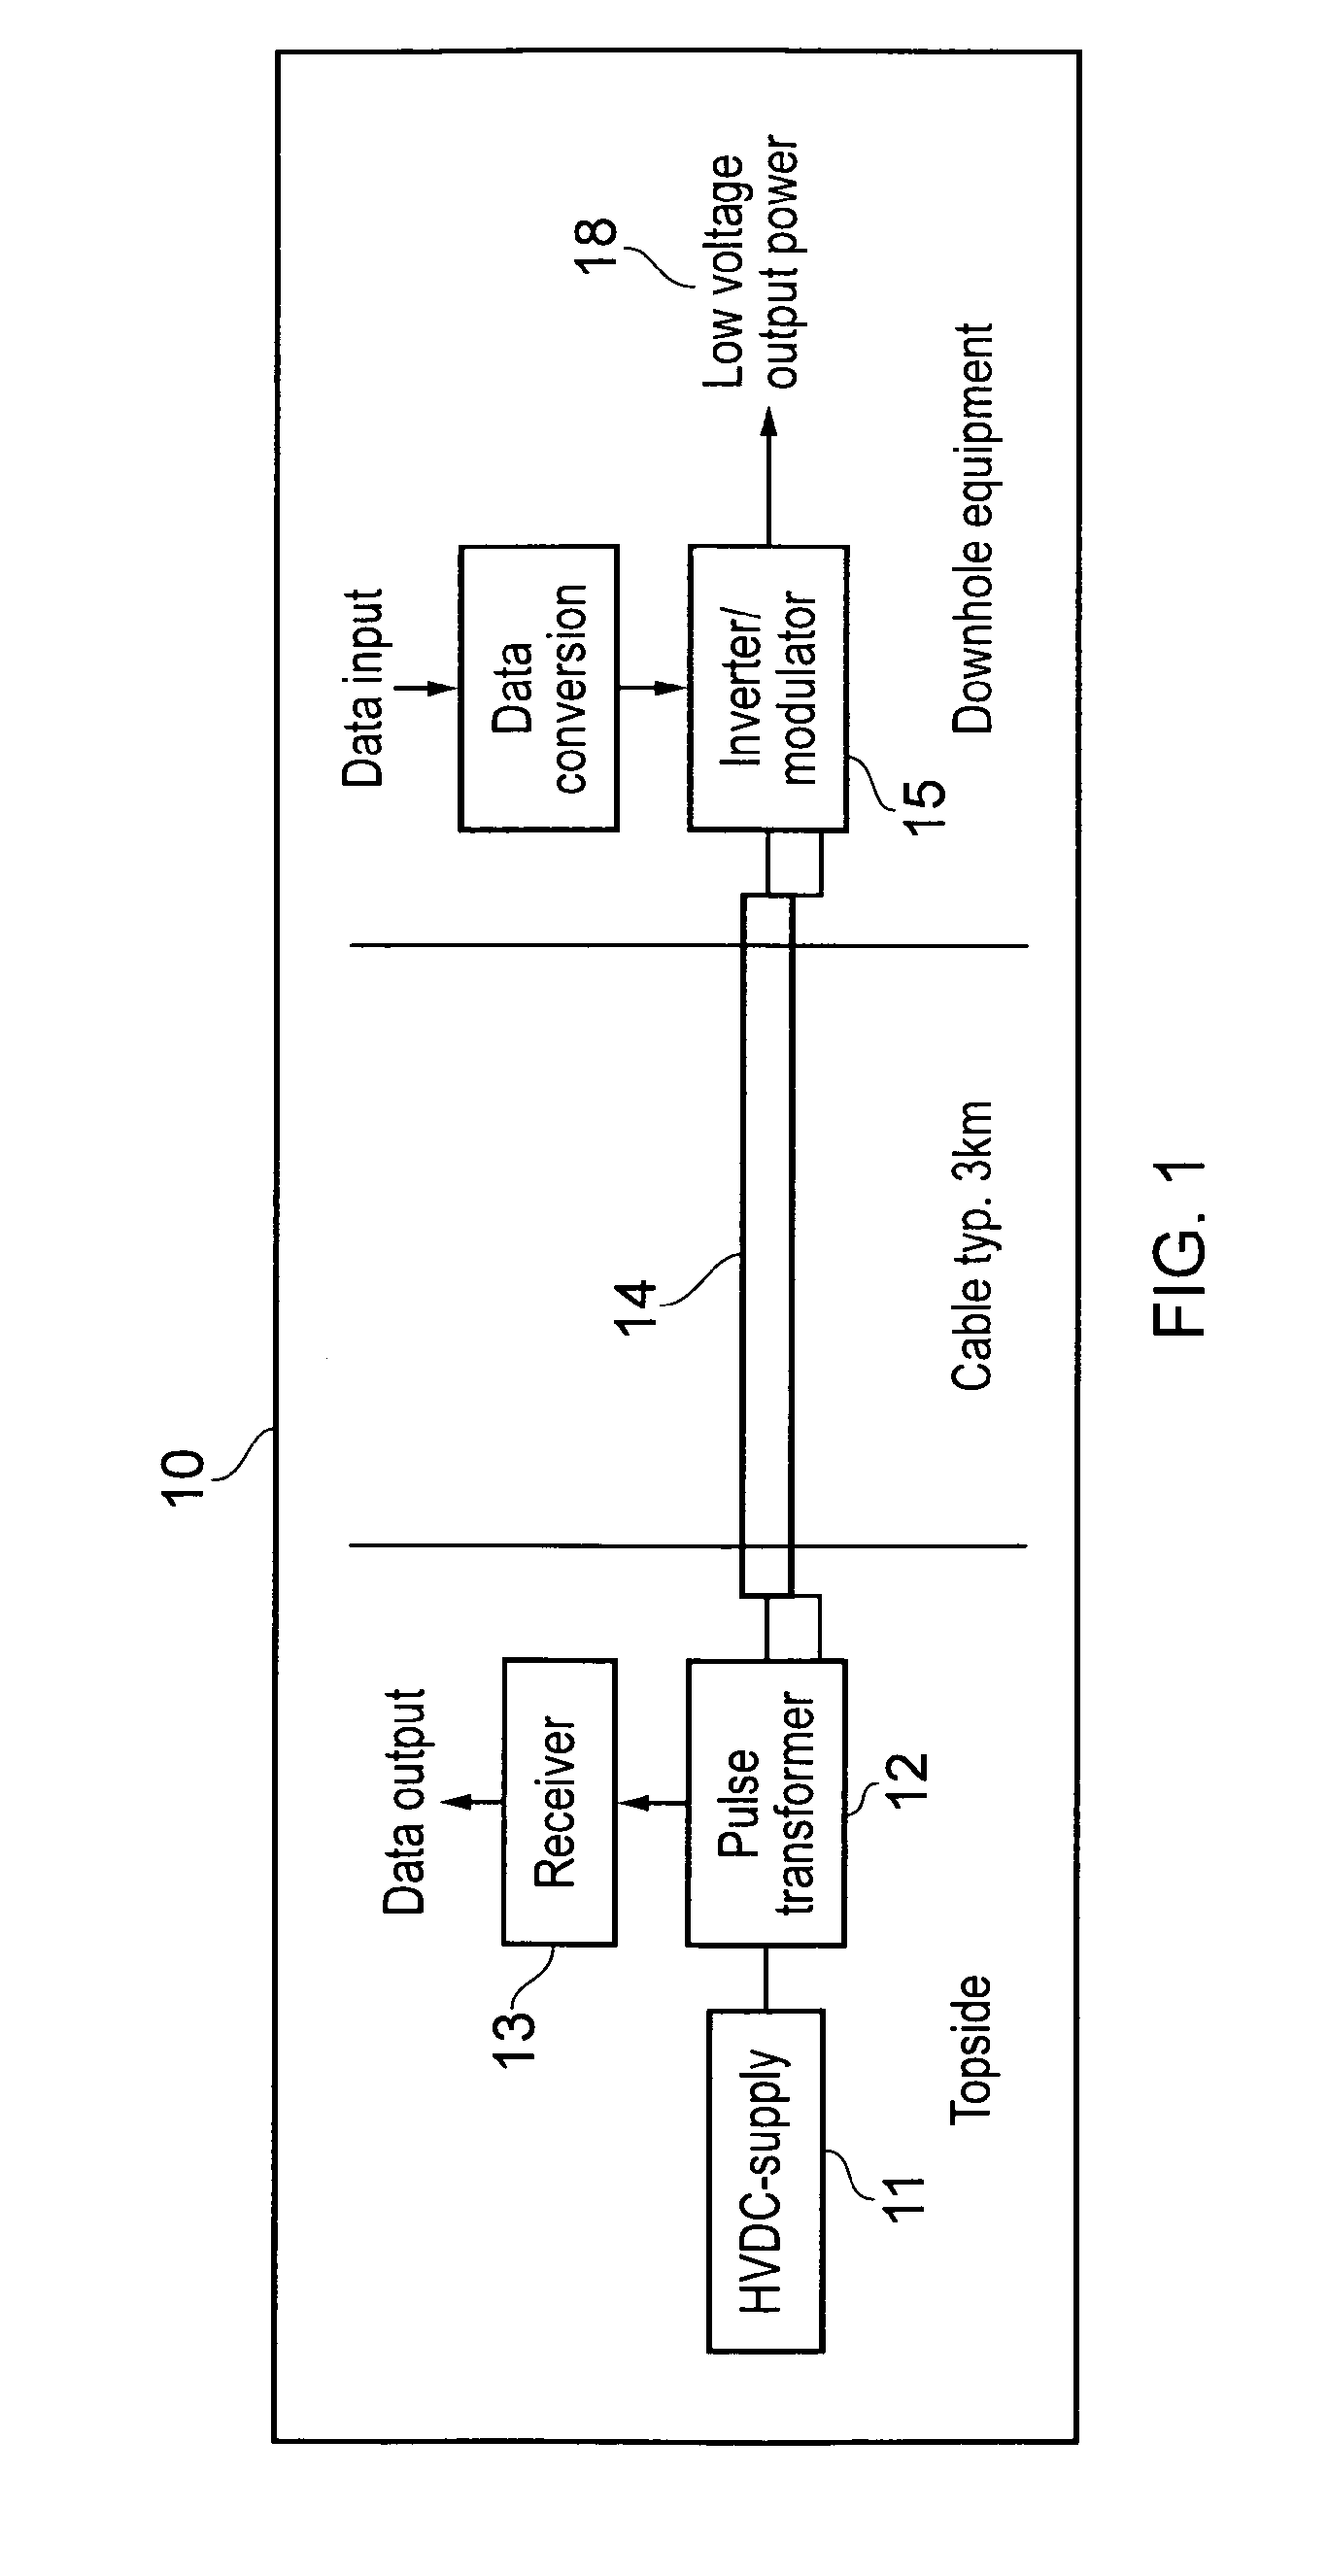 System for communicating over a power cable